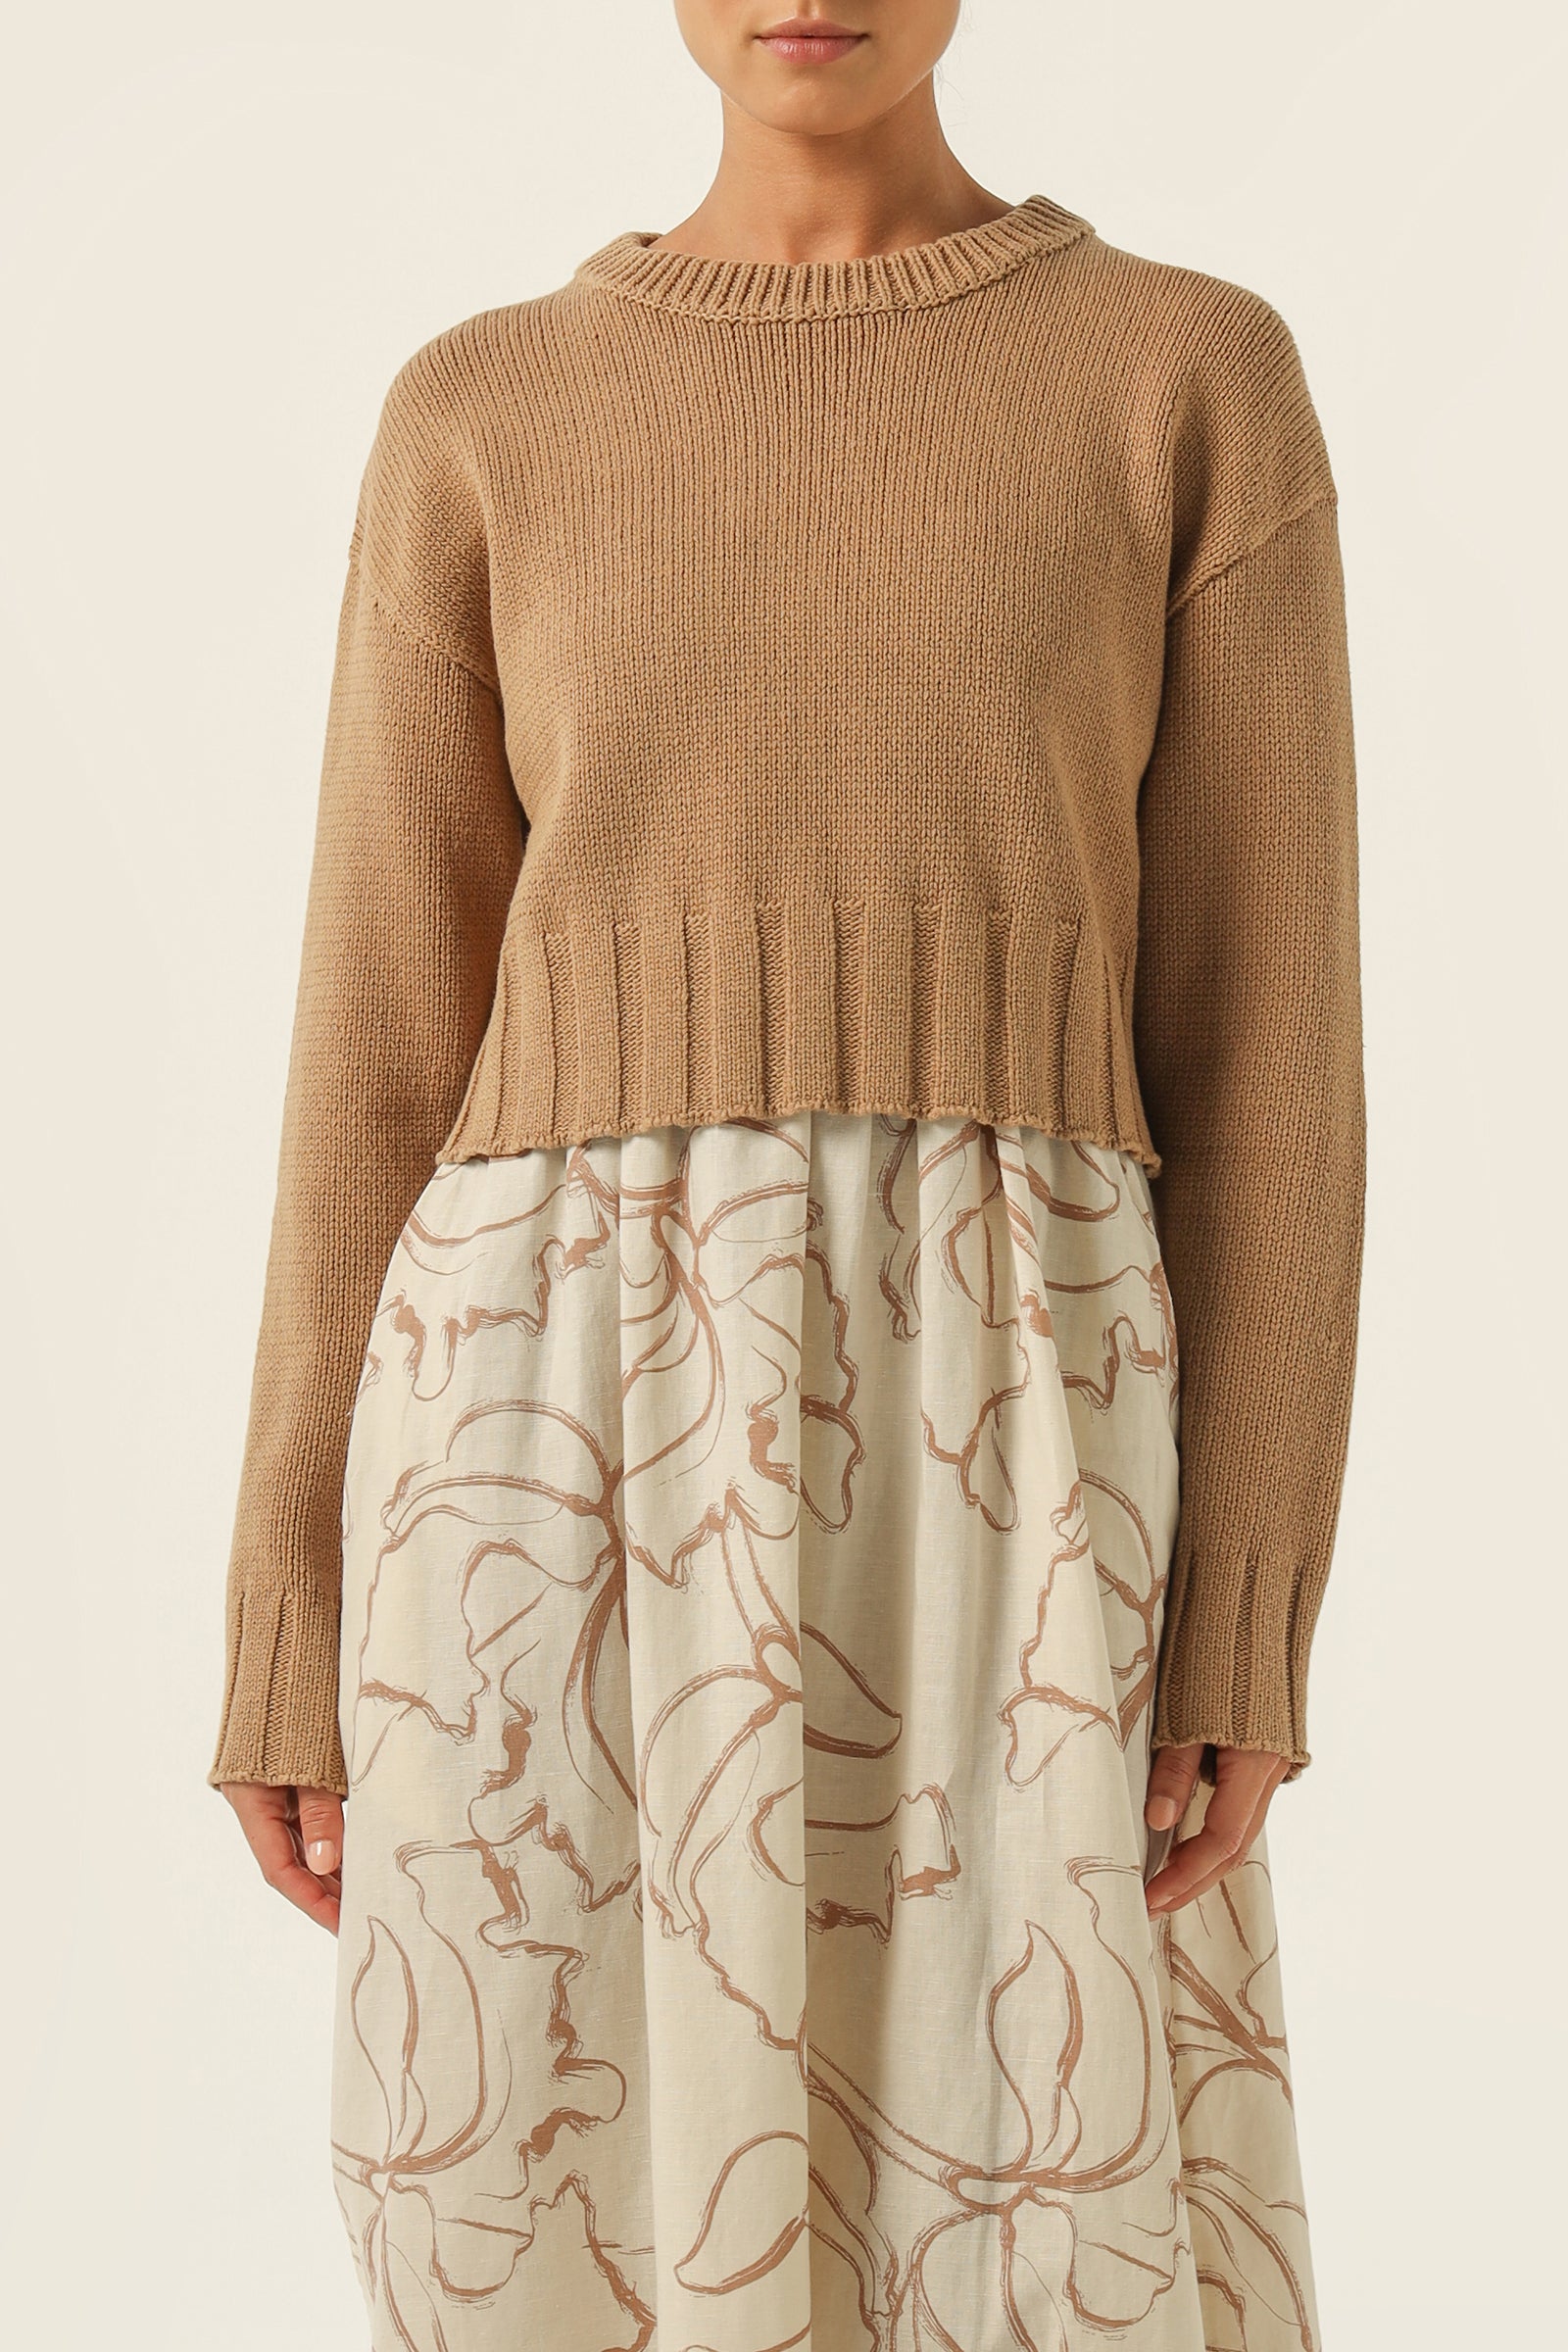 Nude Lucy Rory Knit Jumper in a Brown Coffee Colour